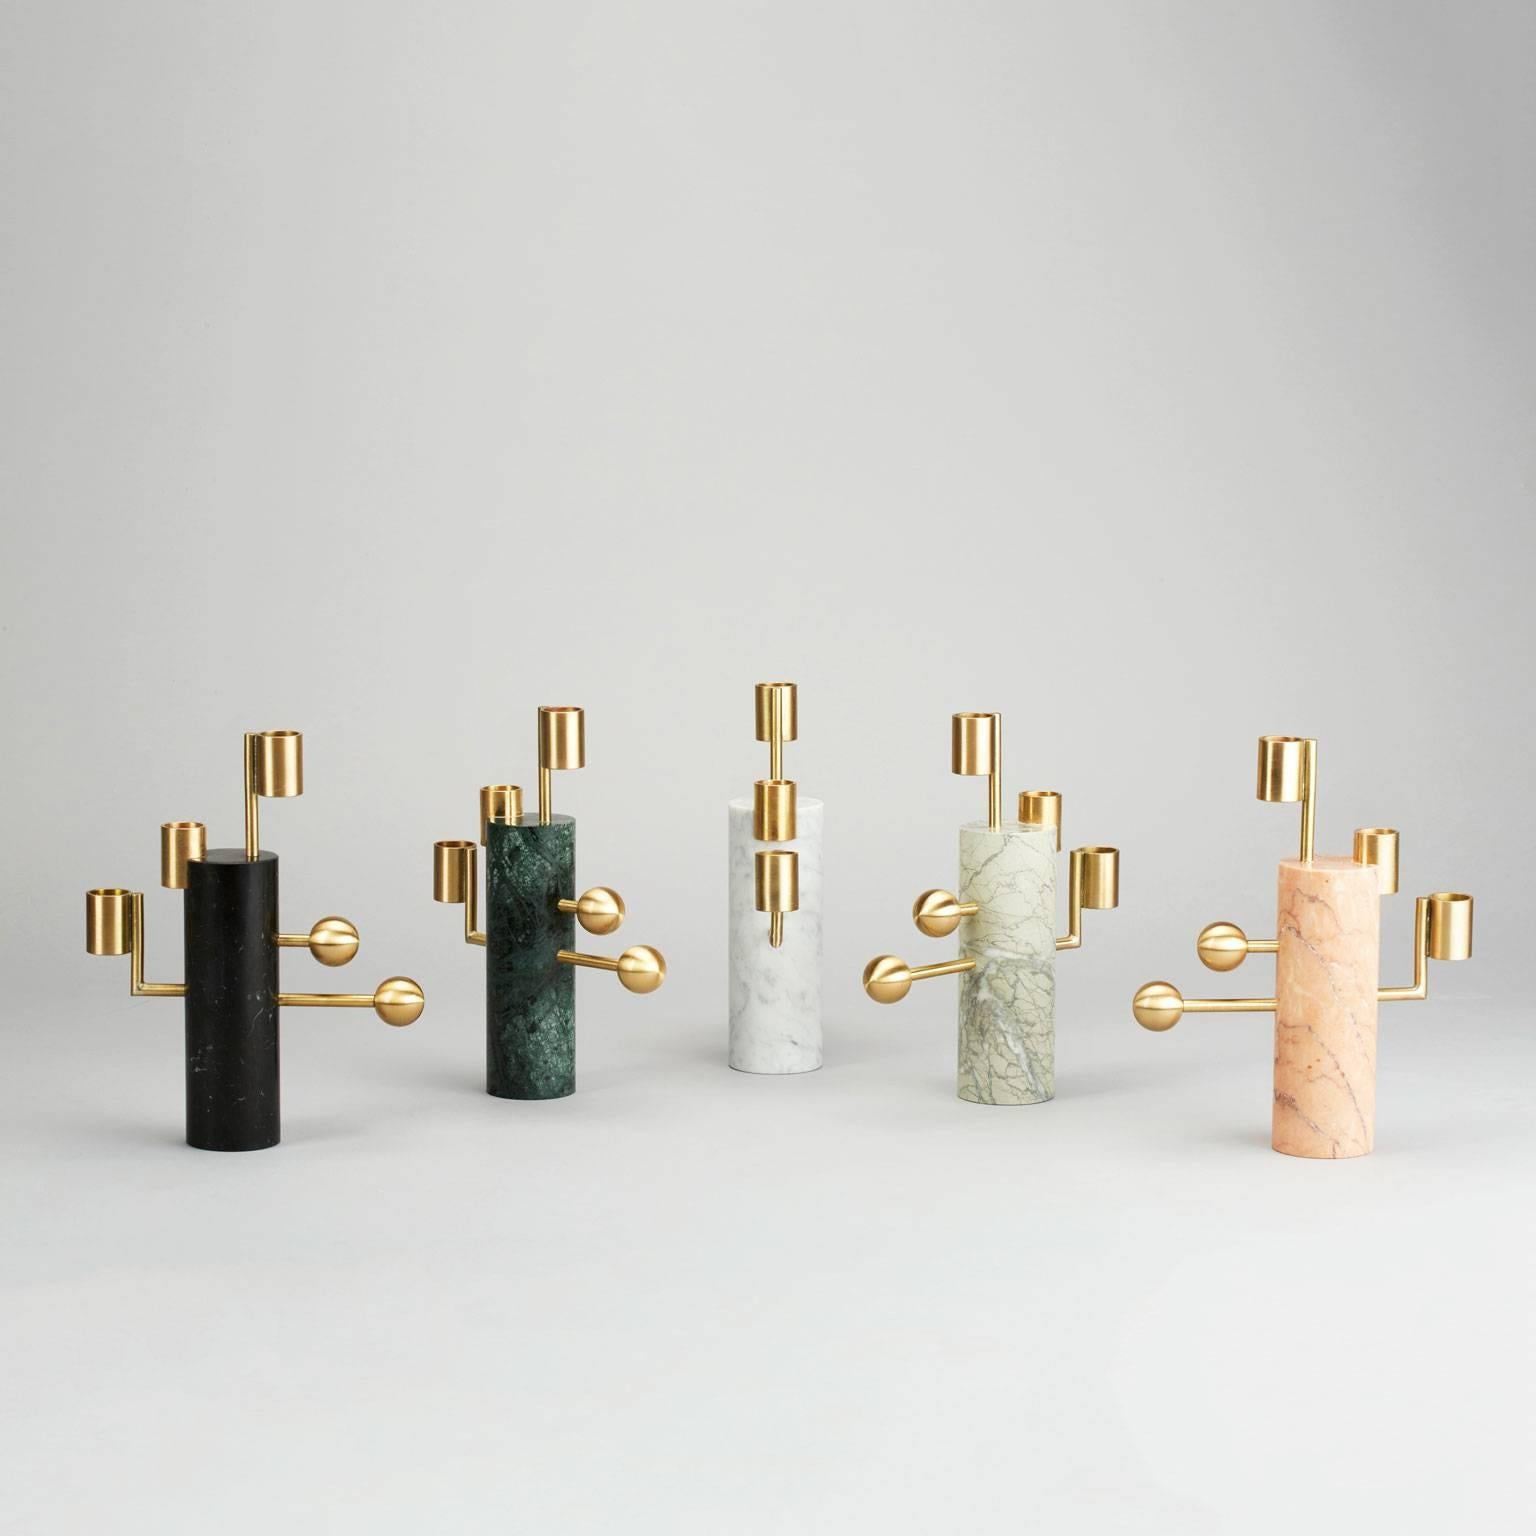 A beautiful union of brass and marble, the ‘Stargazer’ candleholders are inspired by orreries - mechanical models of the solar system used since classical times. Available in two designs, these candlesticks have a powerful sculptural presence far